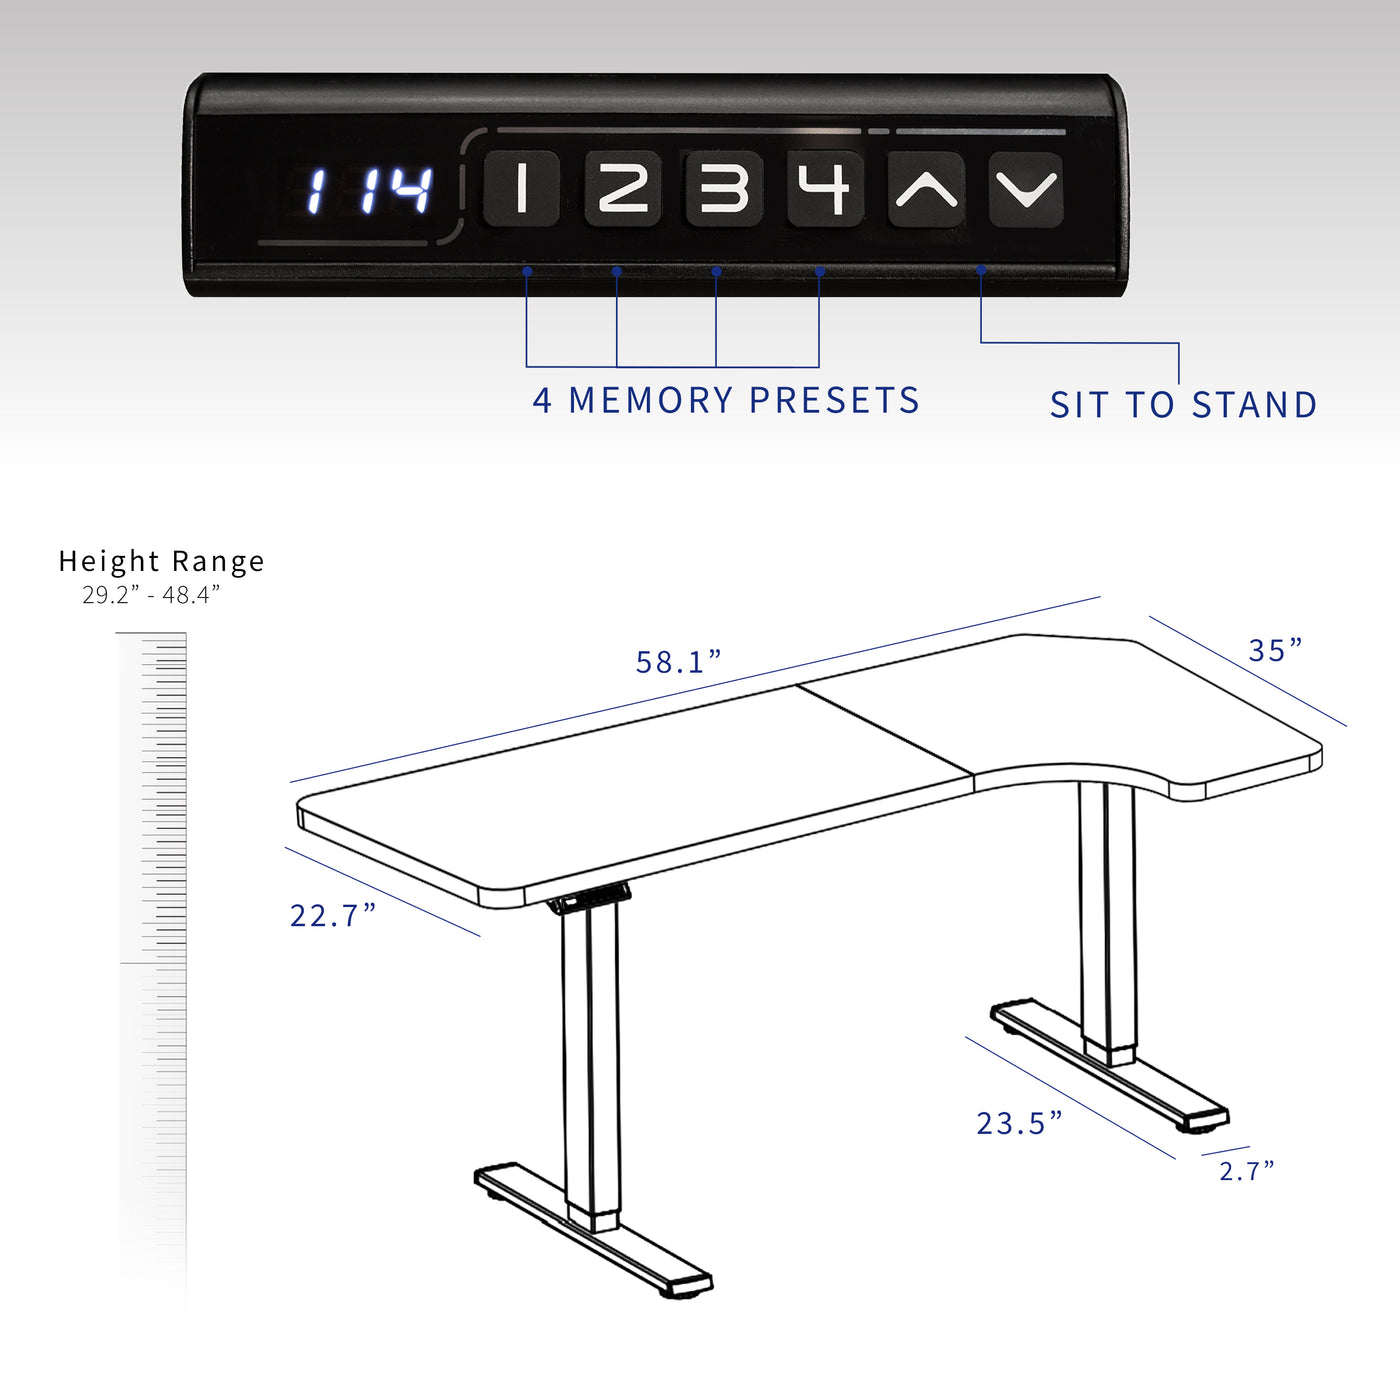 Dimensions of desk frame and top.